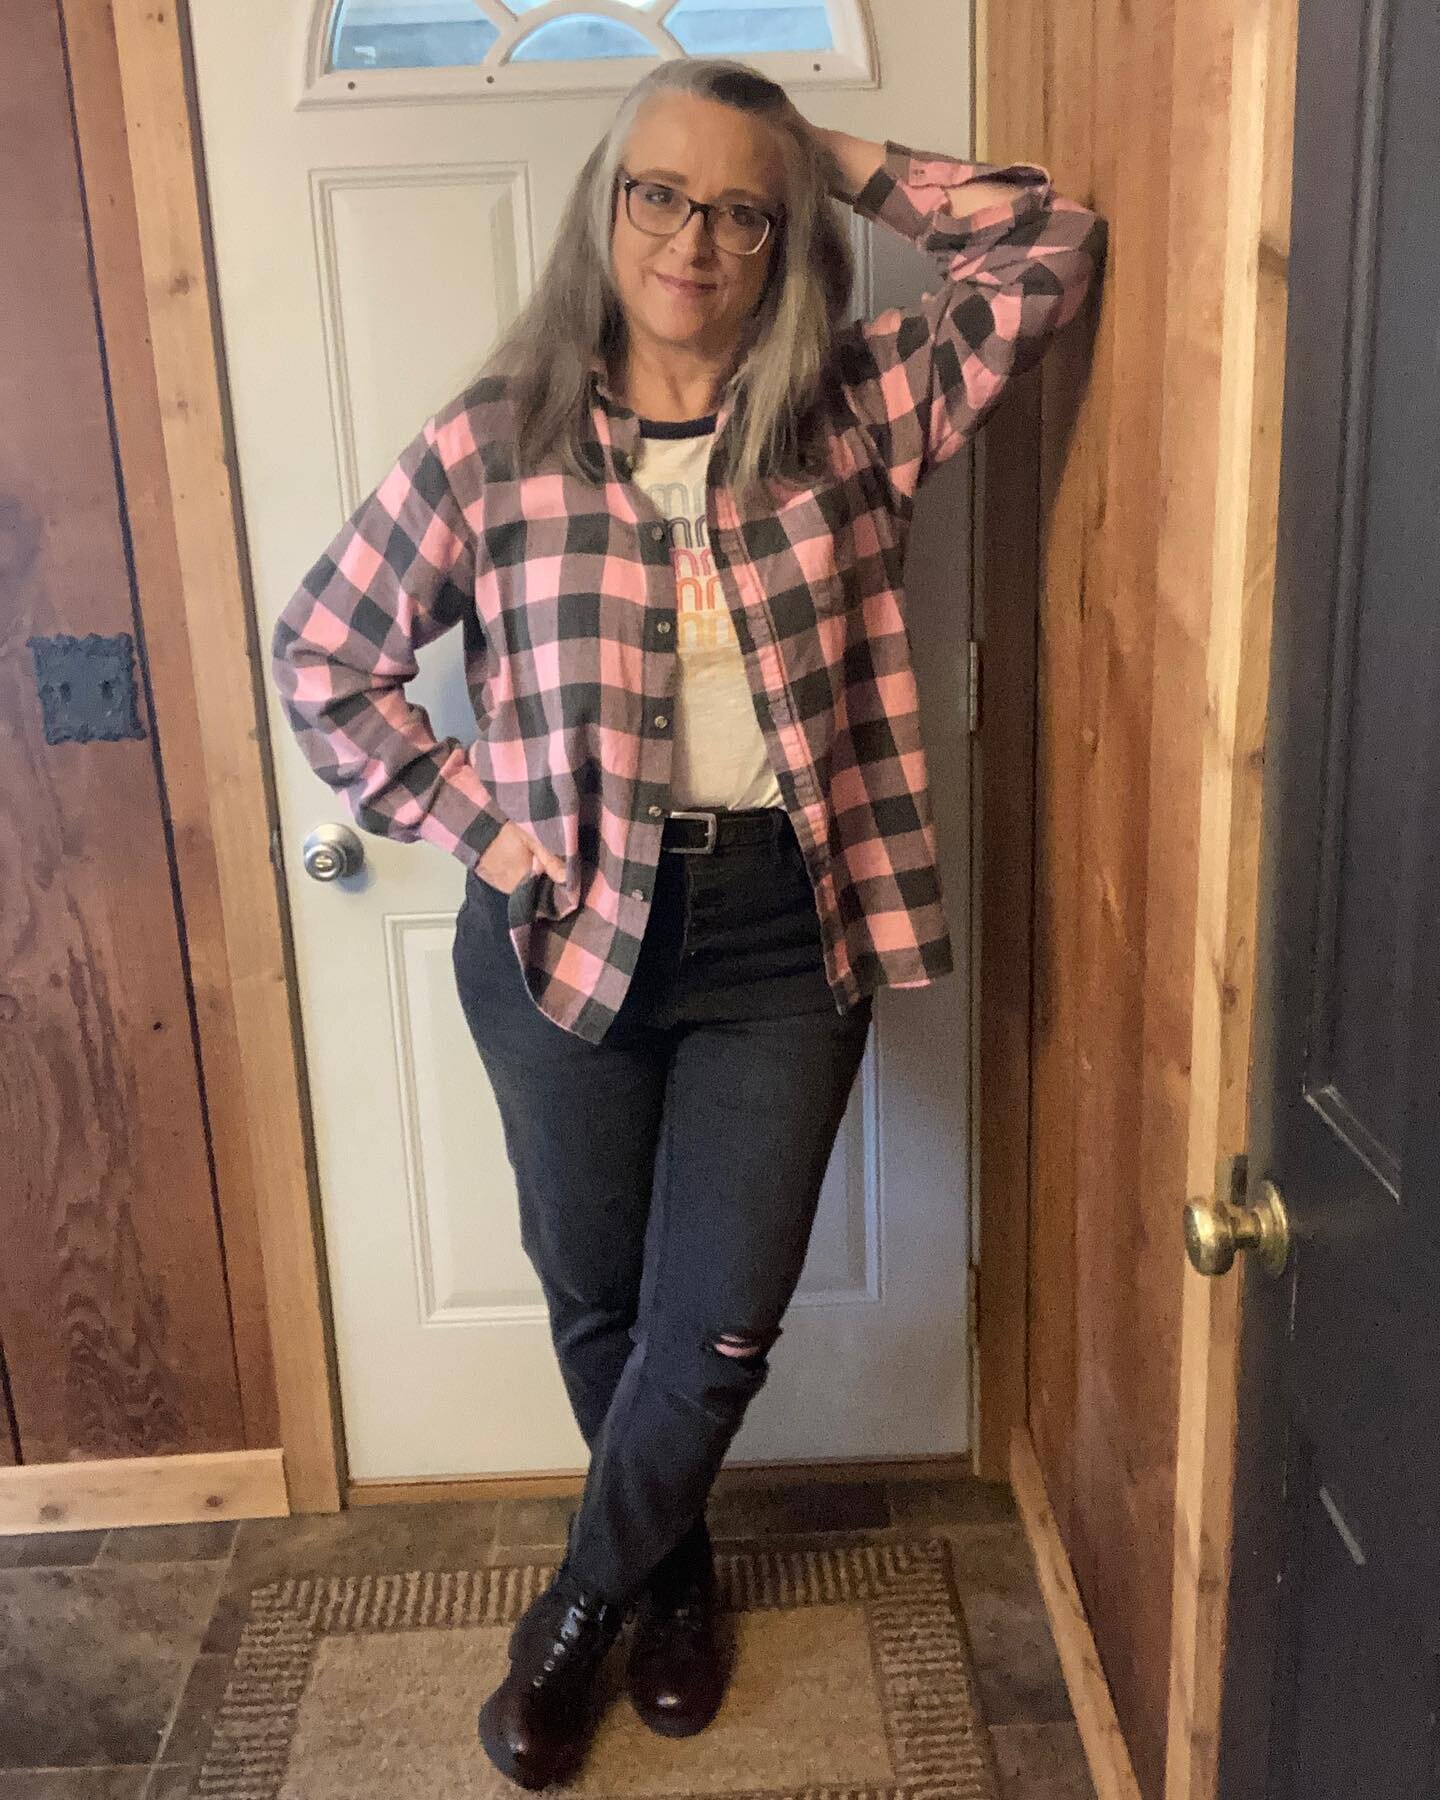 #mismatchmay style challenge with @marydeepriver and @hopeinmycloset . Working this week&rsquo;s prompts again with Mixing Seasons. Flannel shirt and dark maroon combat boots which I normally wear in fall and winter work well as spring attire with di